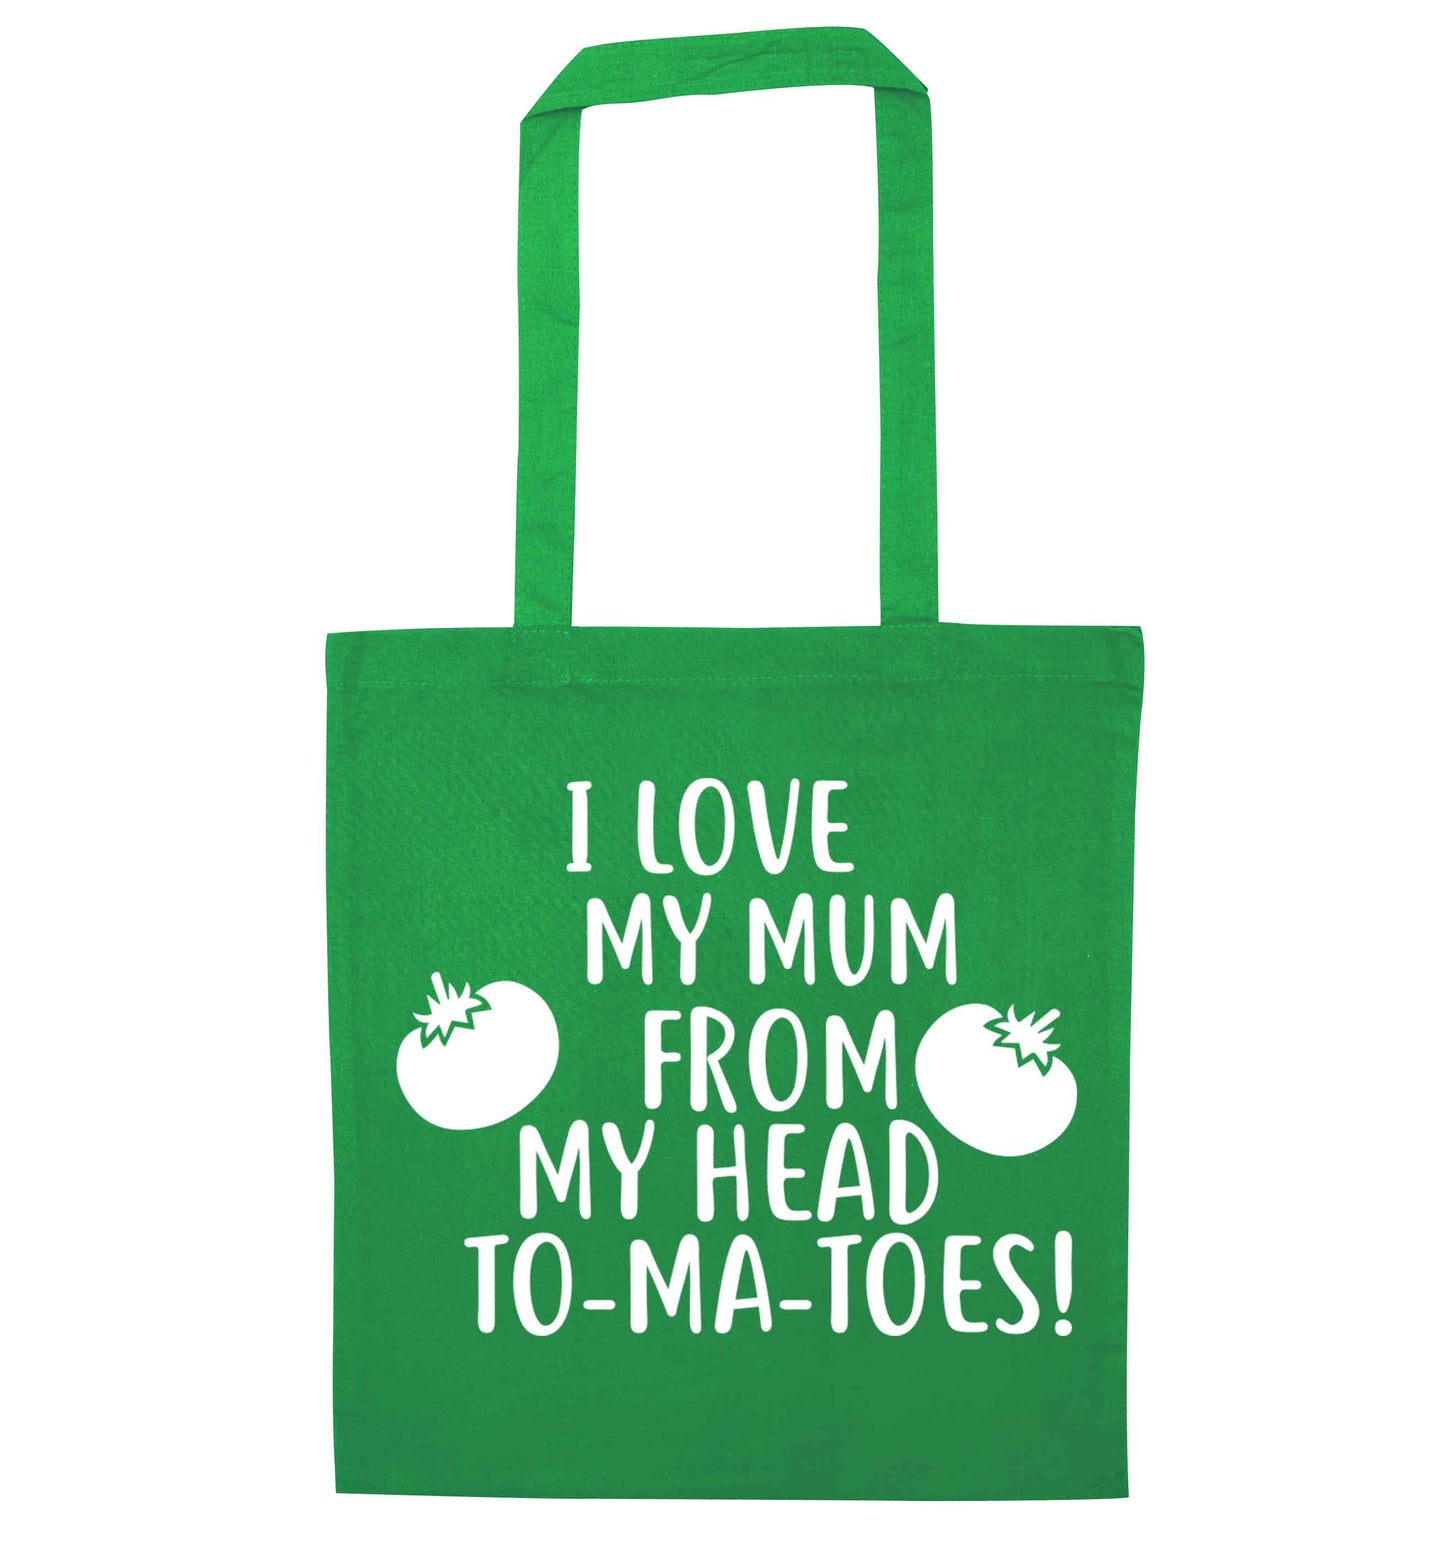 I love my mum from my head to-my-toes! green tote bag